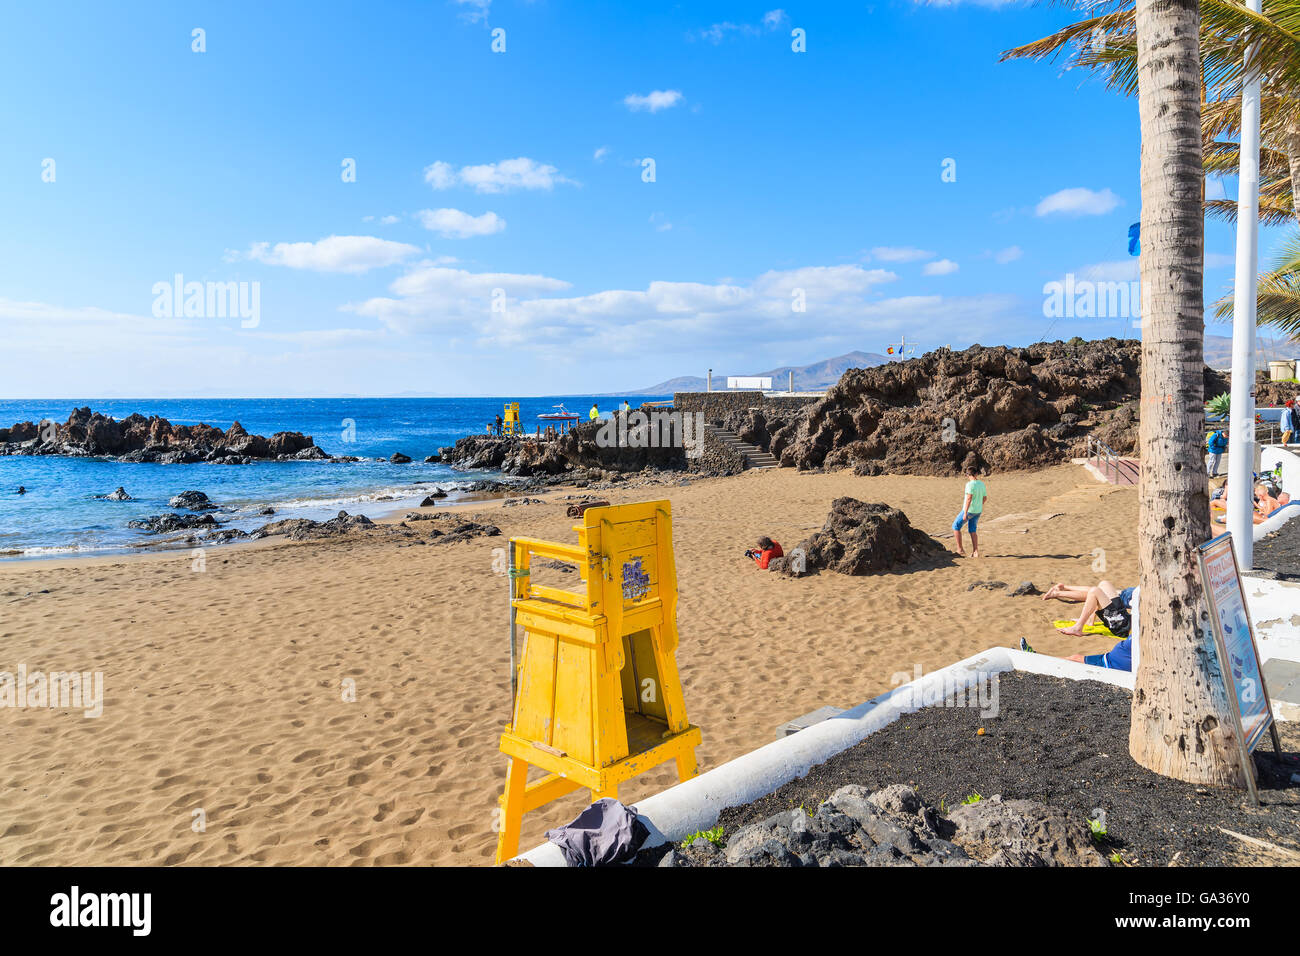 PUERTO DEL CARMEN, LANZAROTE ISLAND - JAN 17, 2015: Yellow lifeguard tower on tropical beach in Puerto del Carmen holiday town. Canary Islands are popular holiday destination all year round. Stock Photo